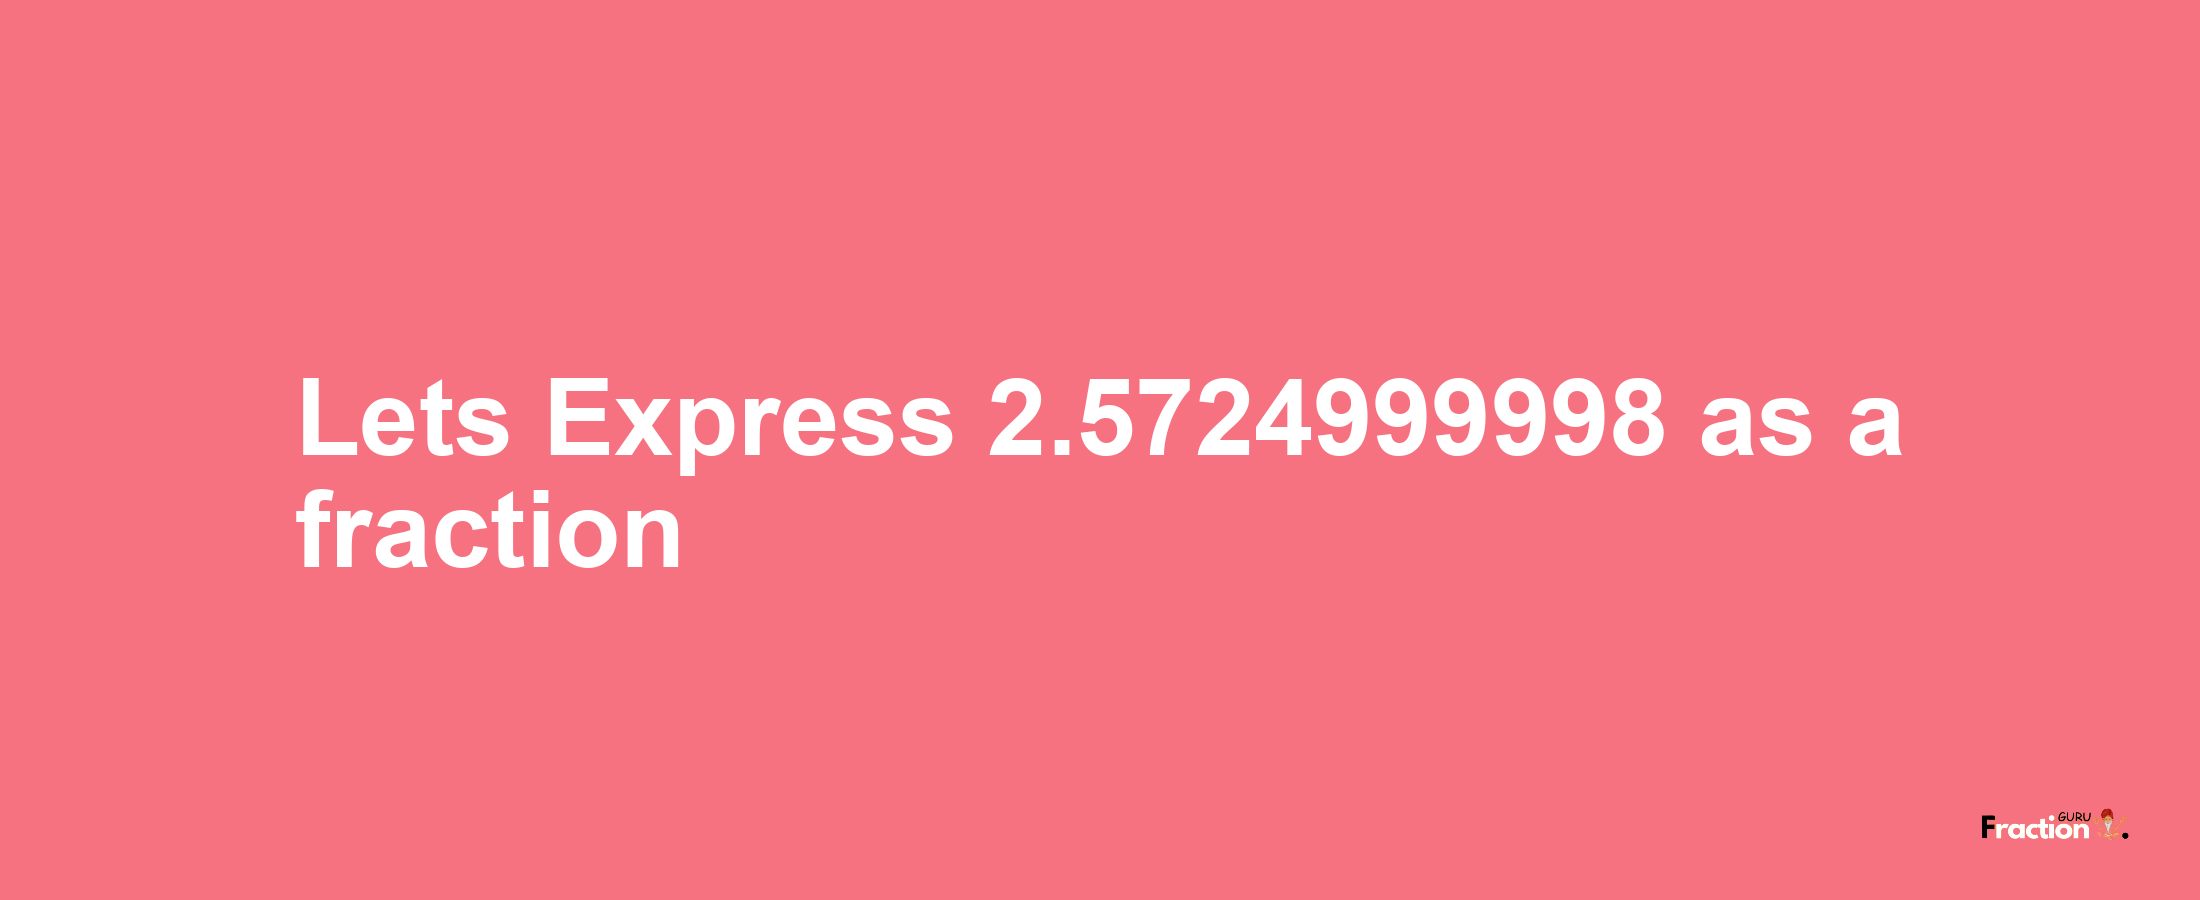 Lets Express 2.5724999998 as afraction